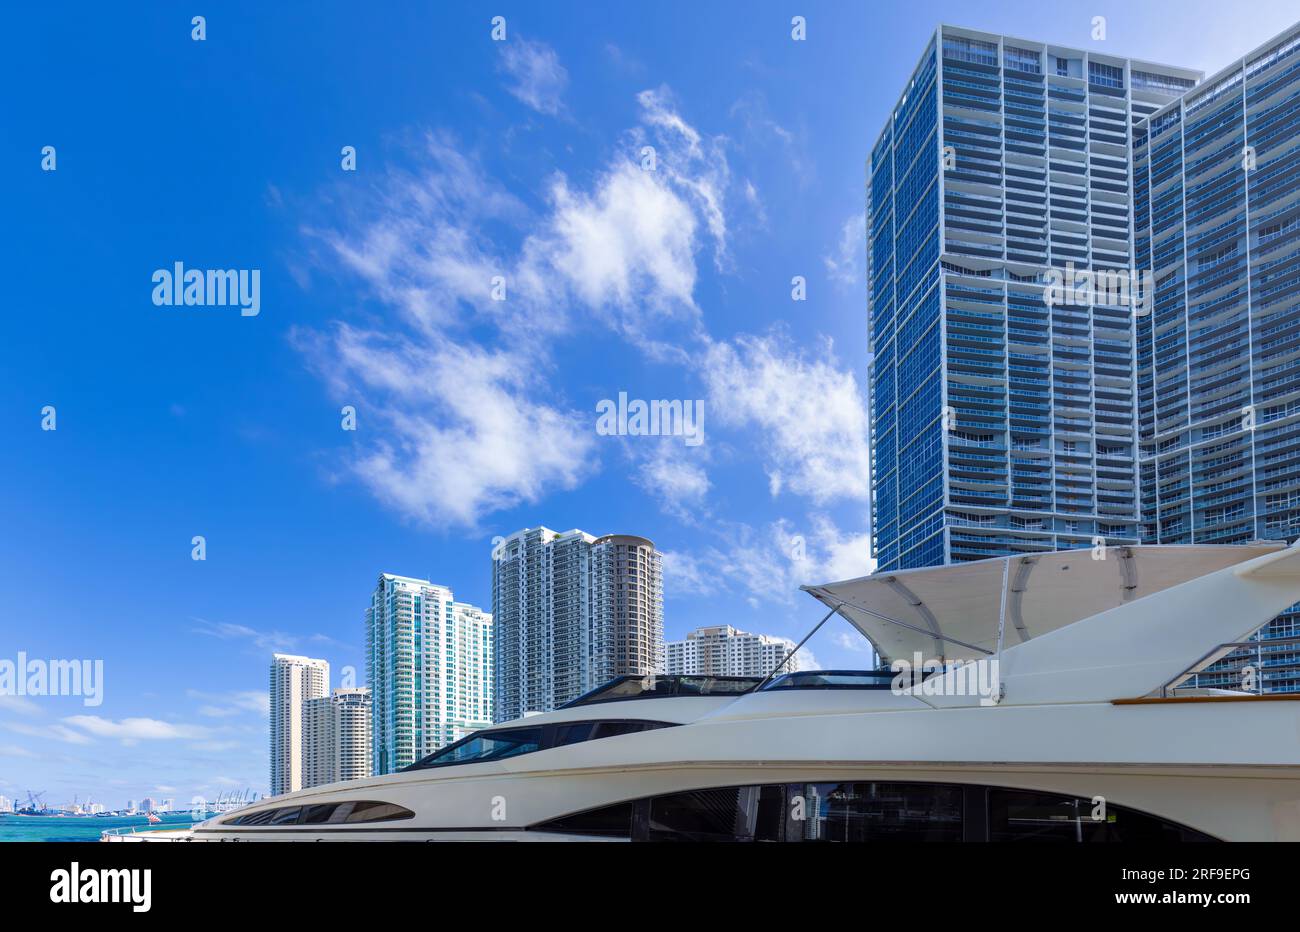 Miami, luxury condominiums located near city financial center, Biscayne Bay and South Beach. Stock Photo